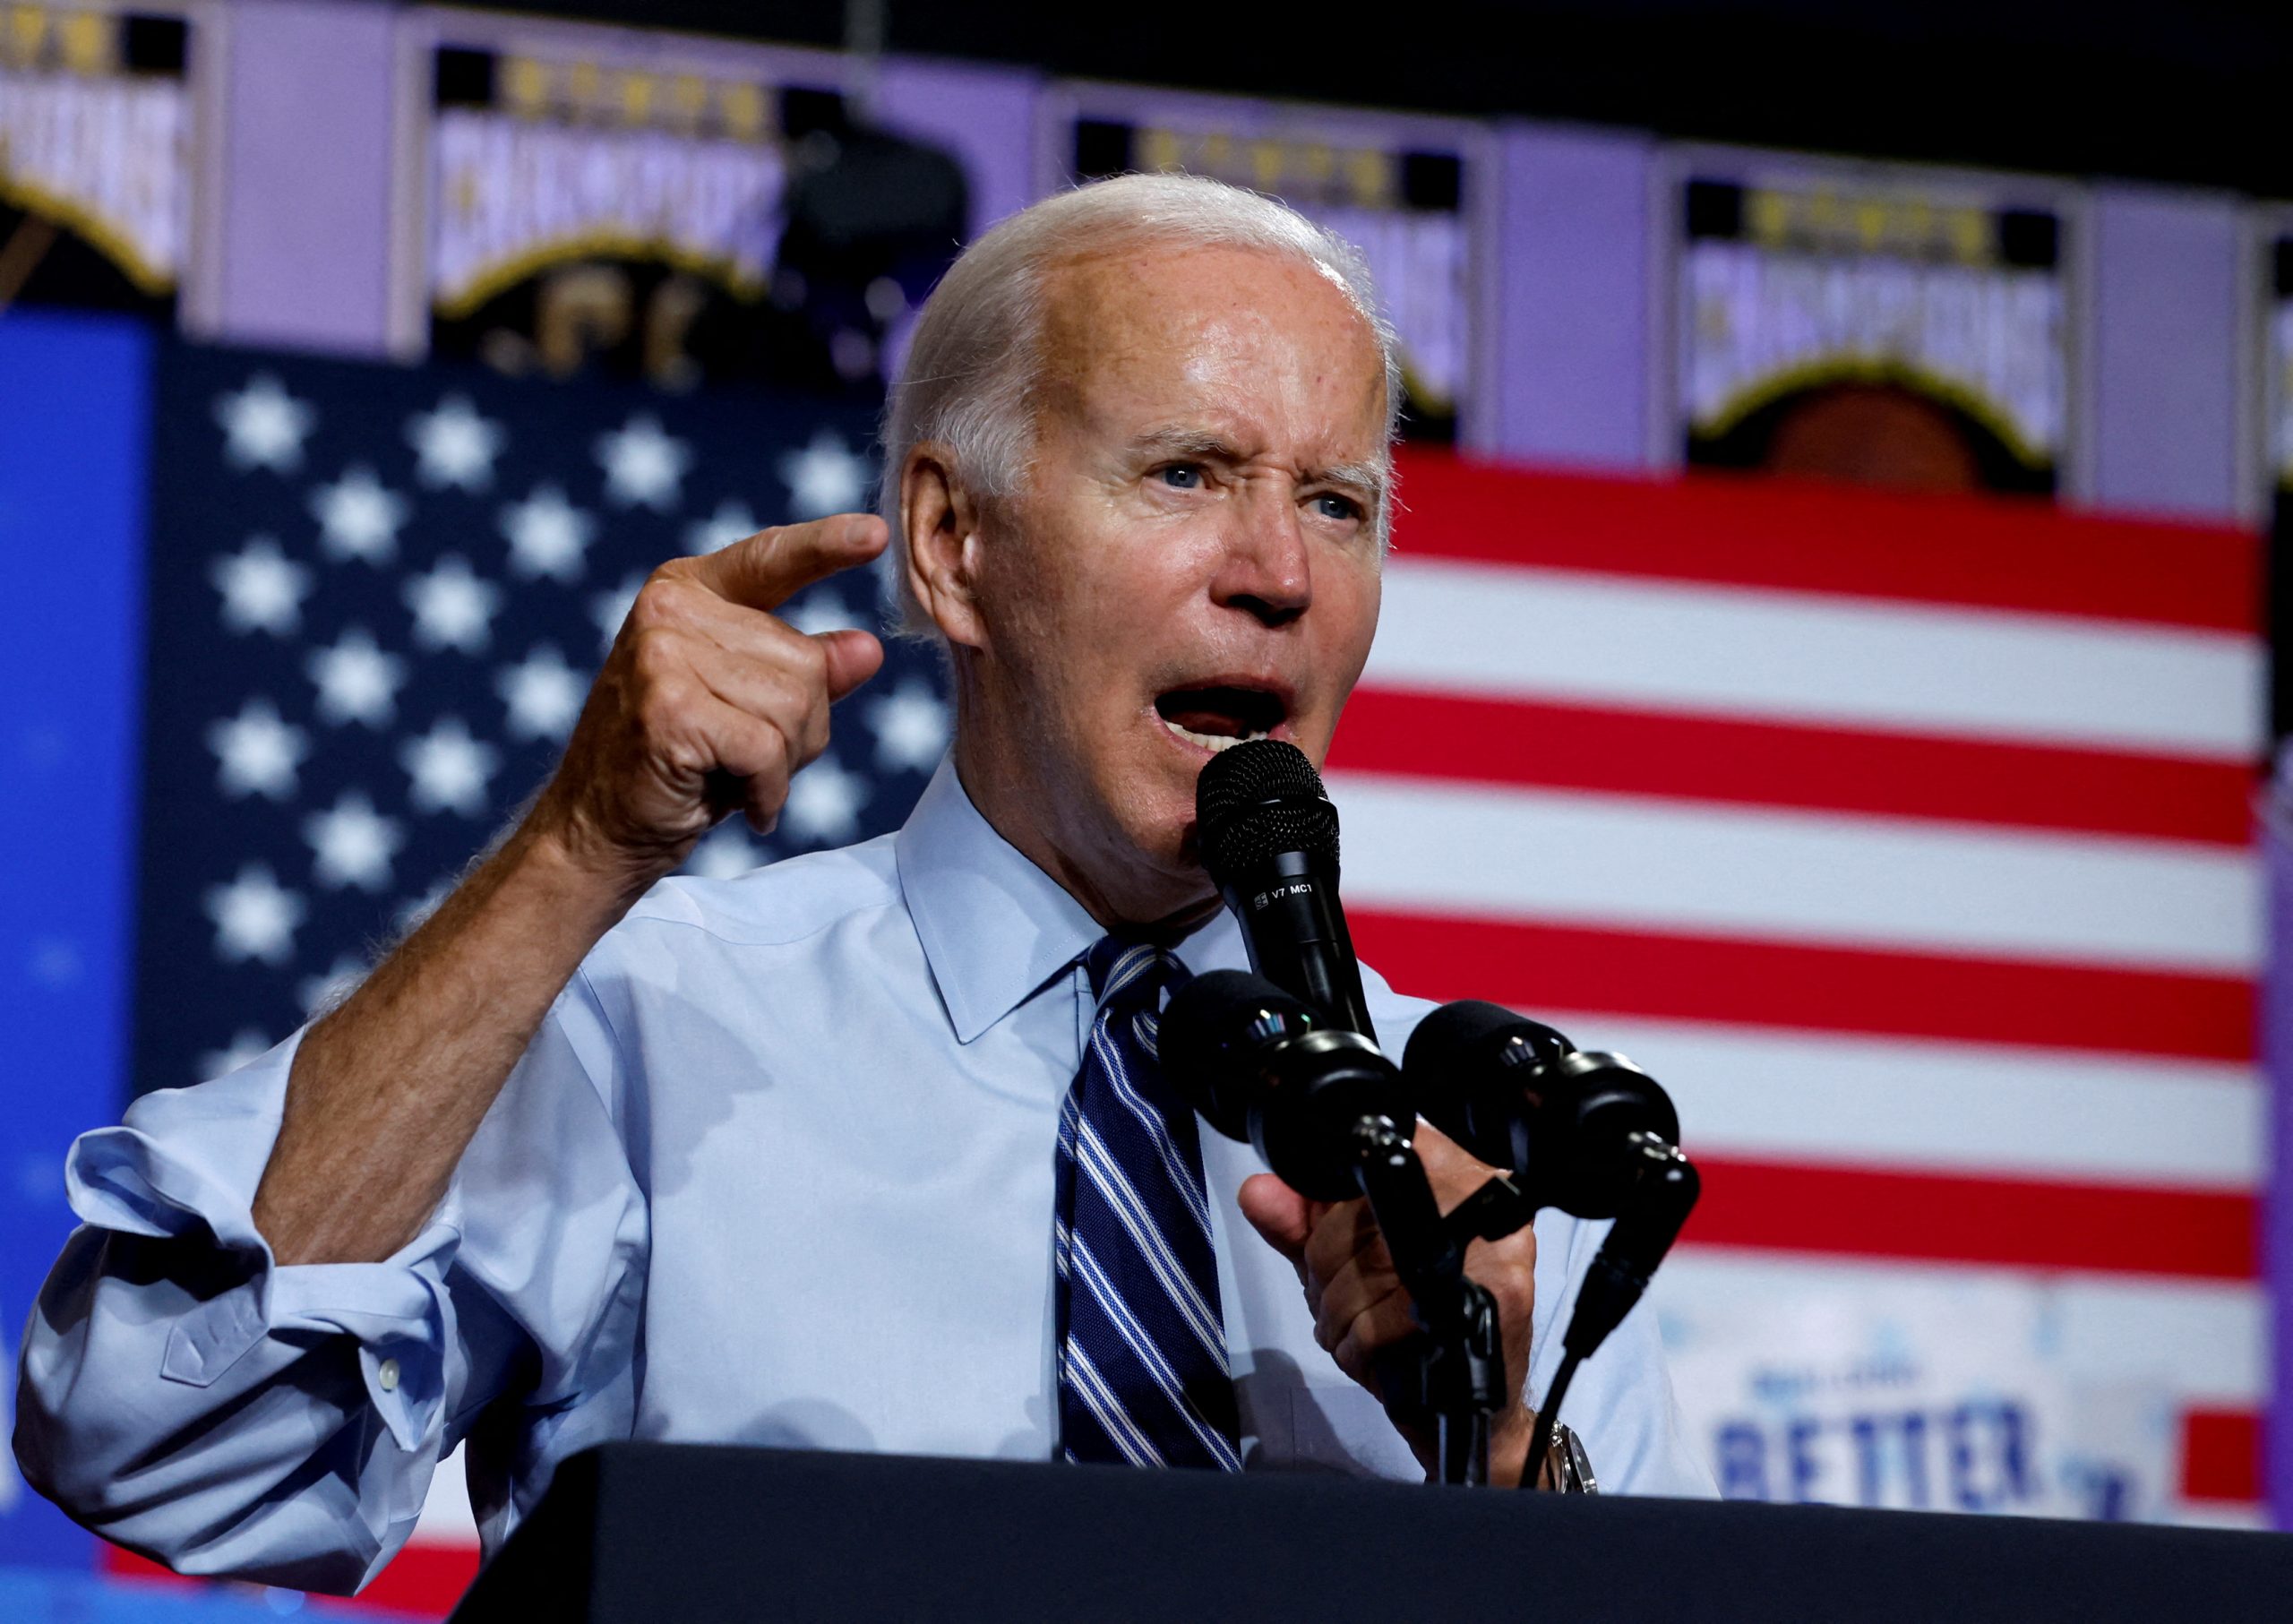 Biden to Unveil Budget That Hikes Taxes, Increases Spending